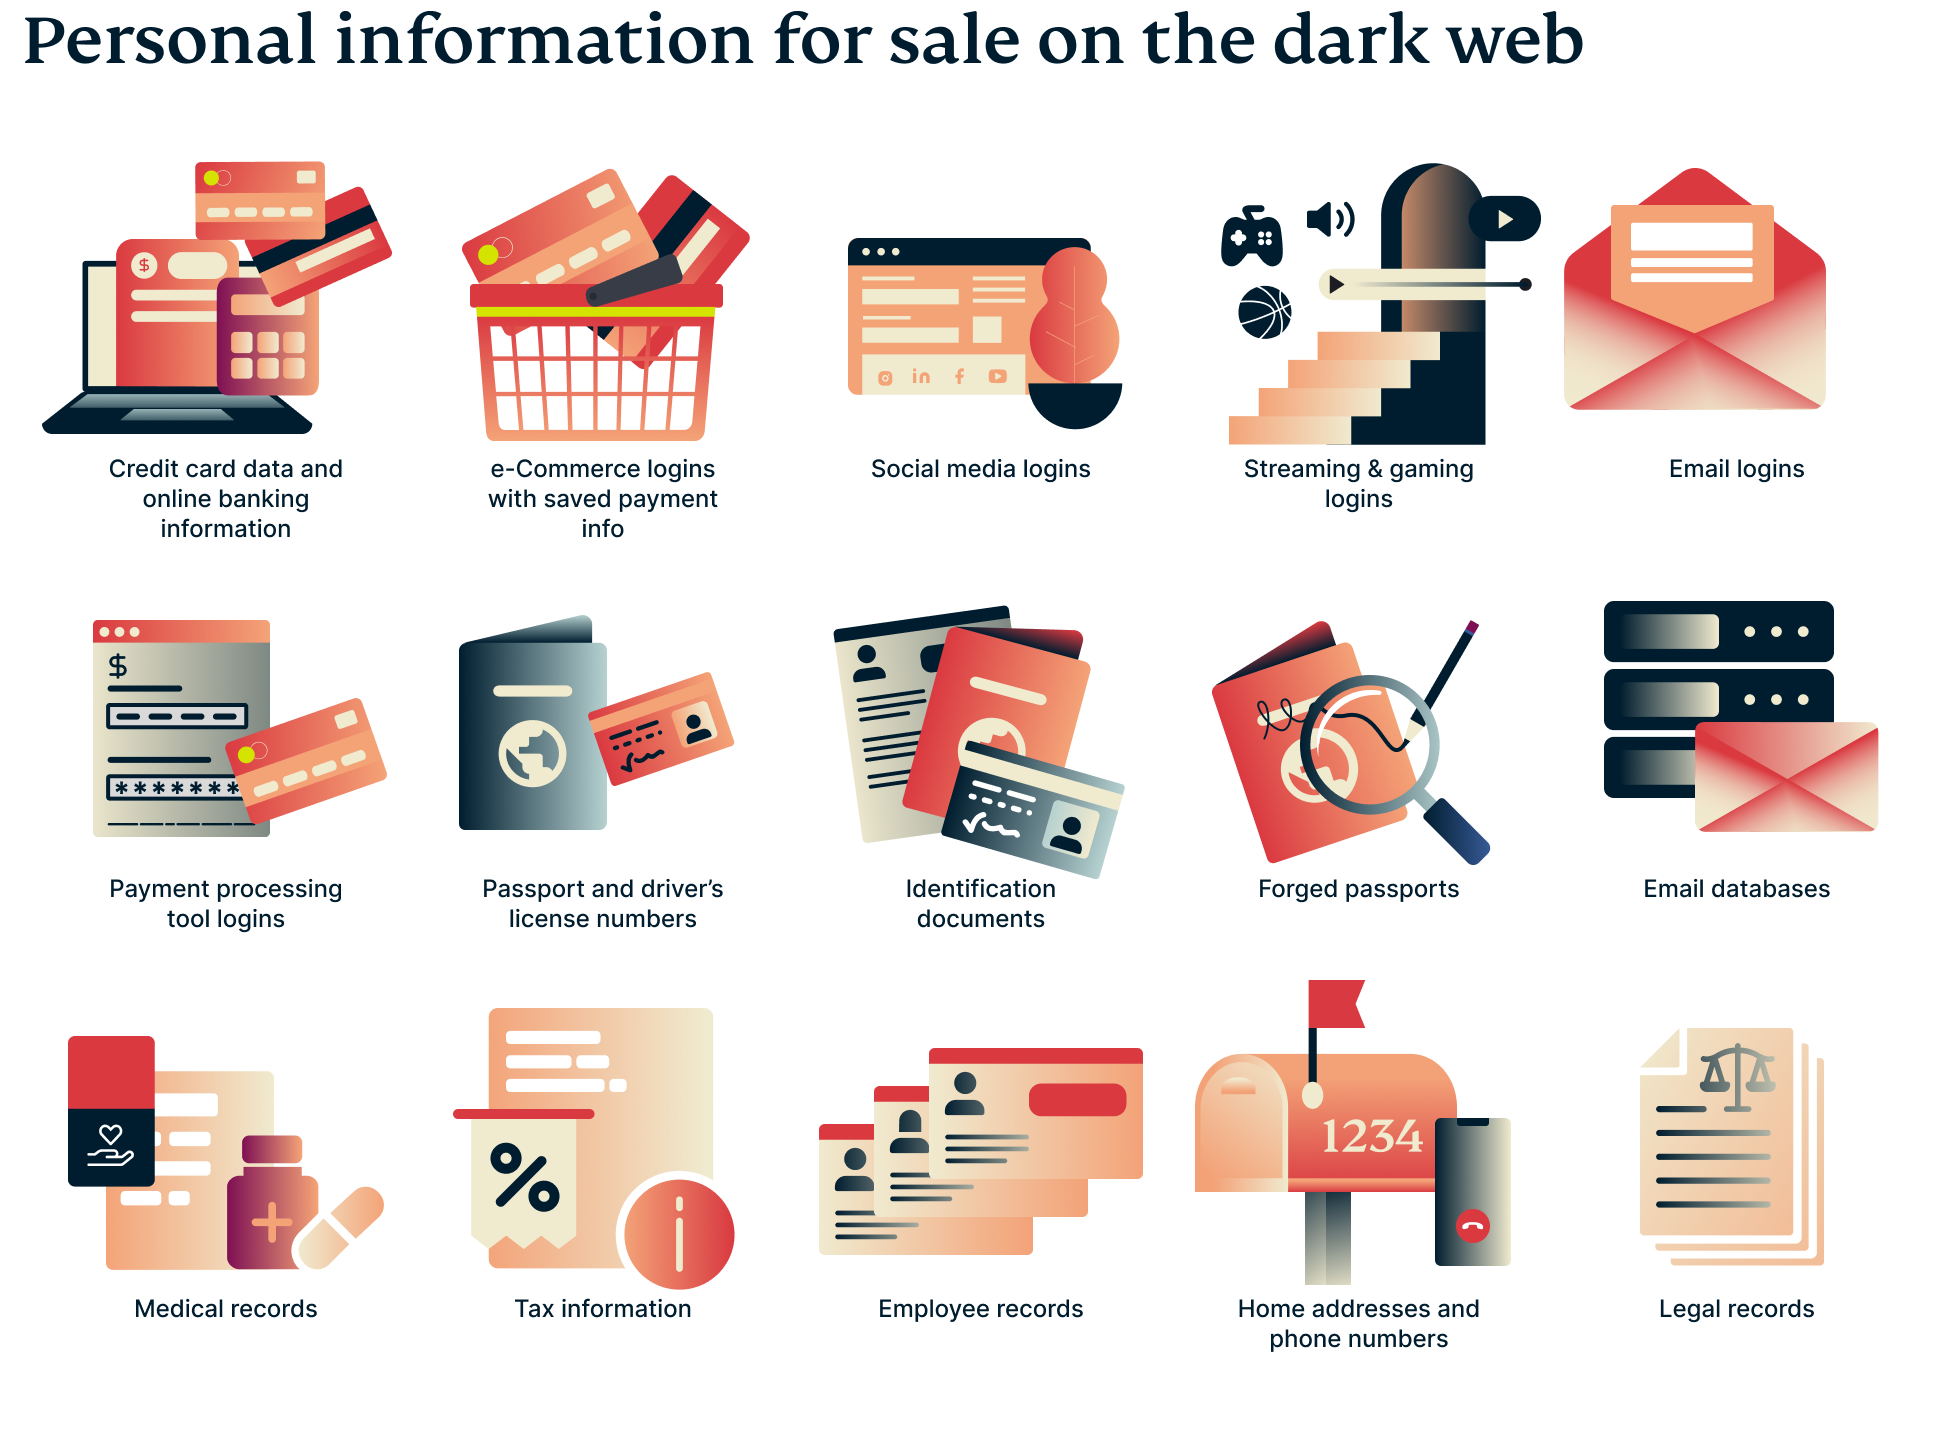 alt=”Personal information for sale on the dark web”